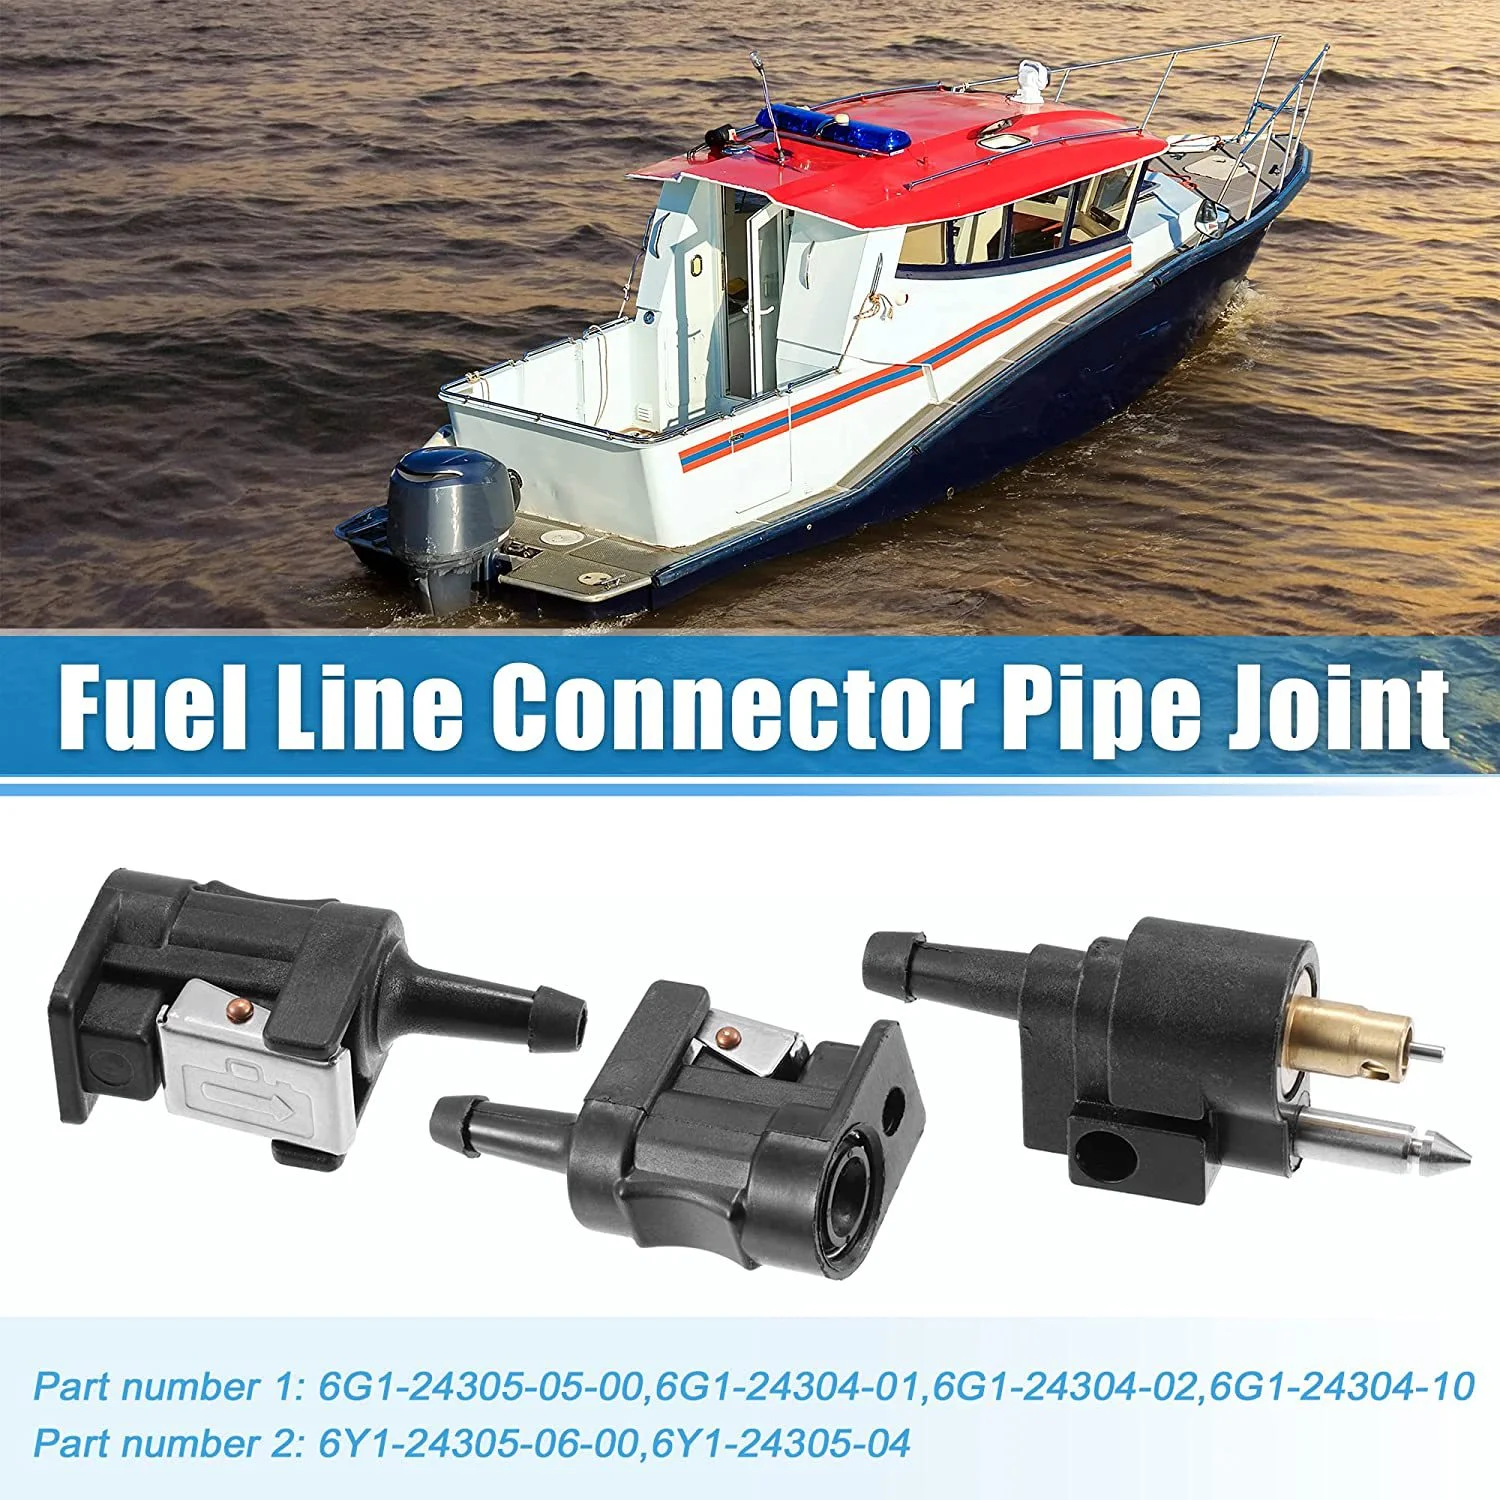 Marine Outboard Oil Tank Fuel Line Male/ Female Sockets Quick Coupling Yachts/Fishing Boats/Fast Boats/Cruise Ships Accessories thread female head pneumatic connector quick type coupler coupling connector fitting g1 4 male thread pneumatic